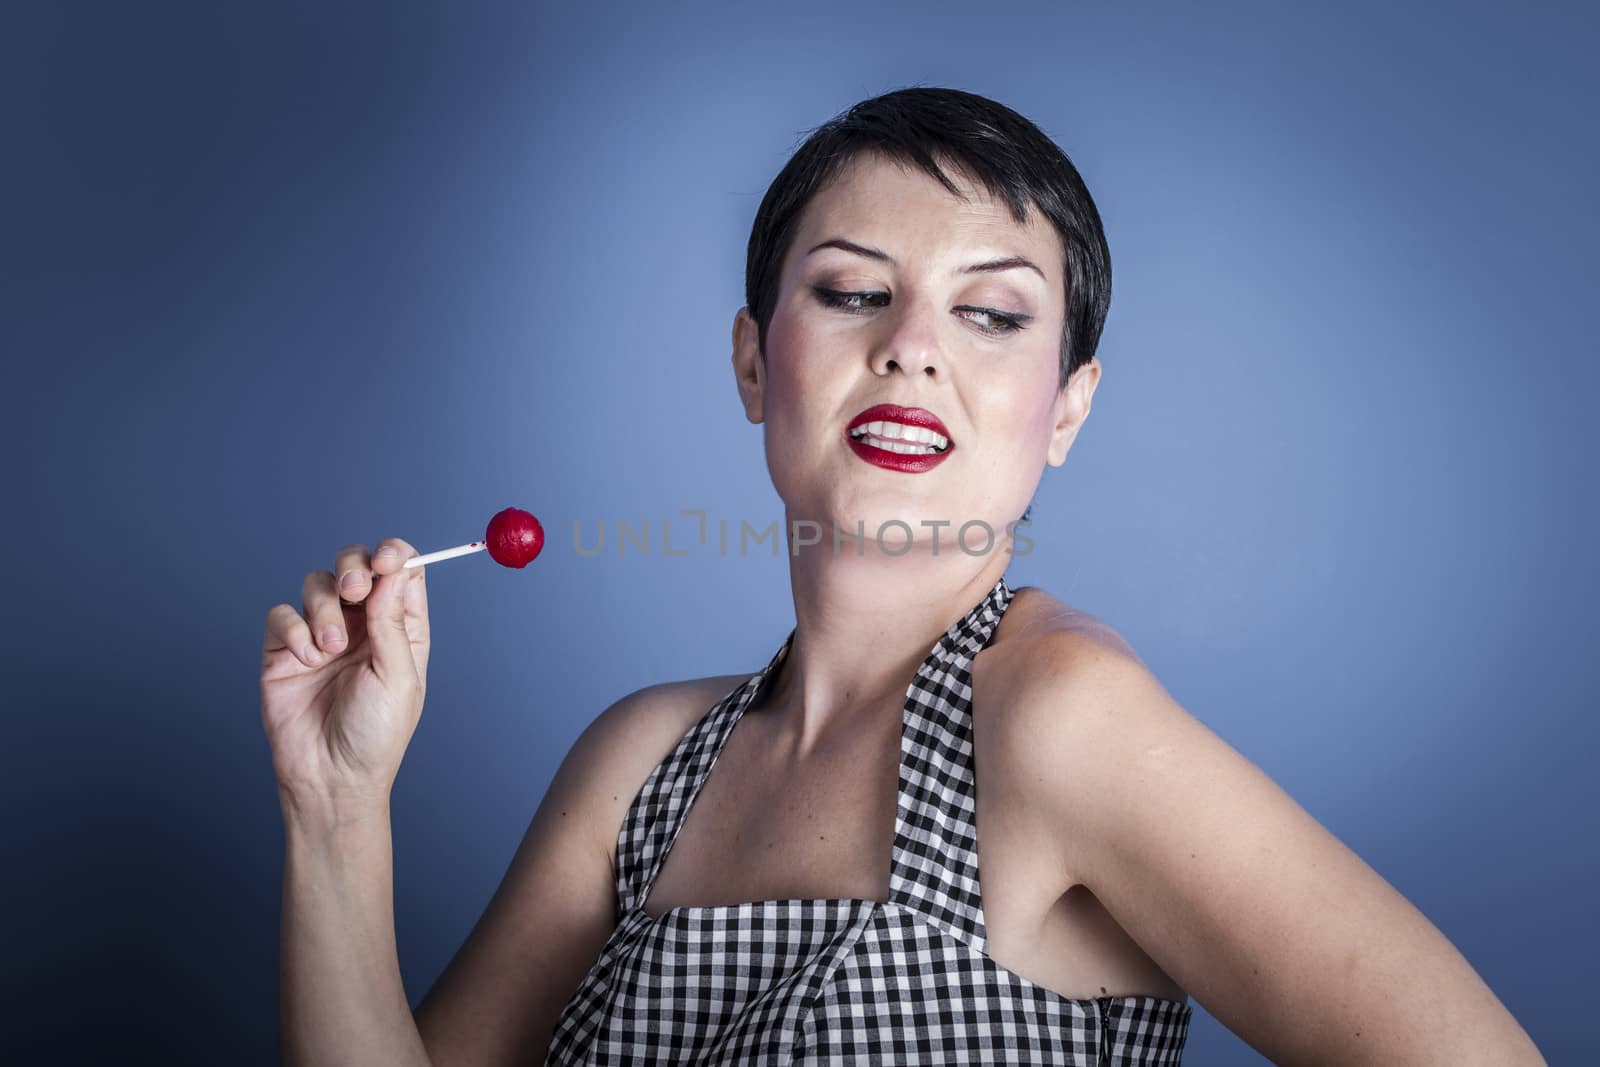 Eat, happy young woman with lollipop in her mouth on blue background